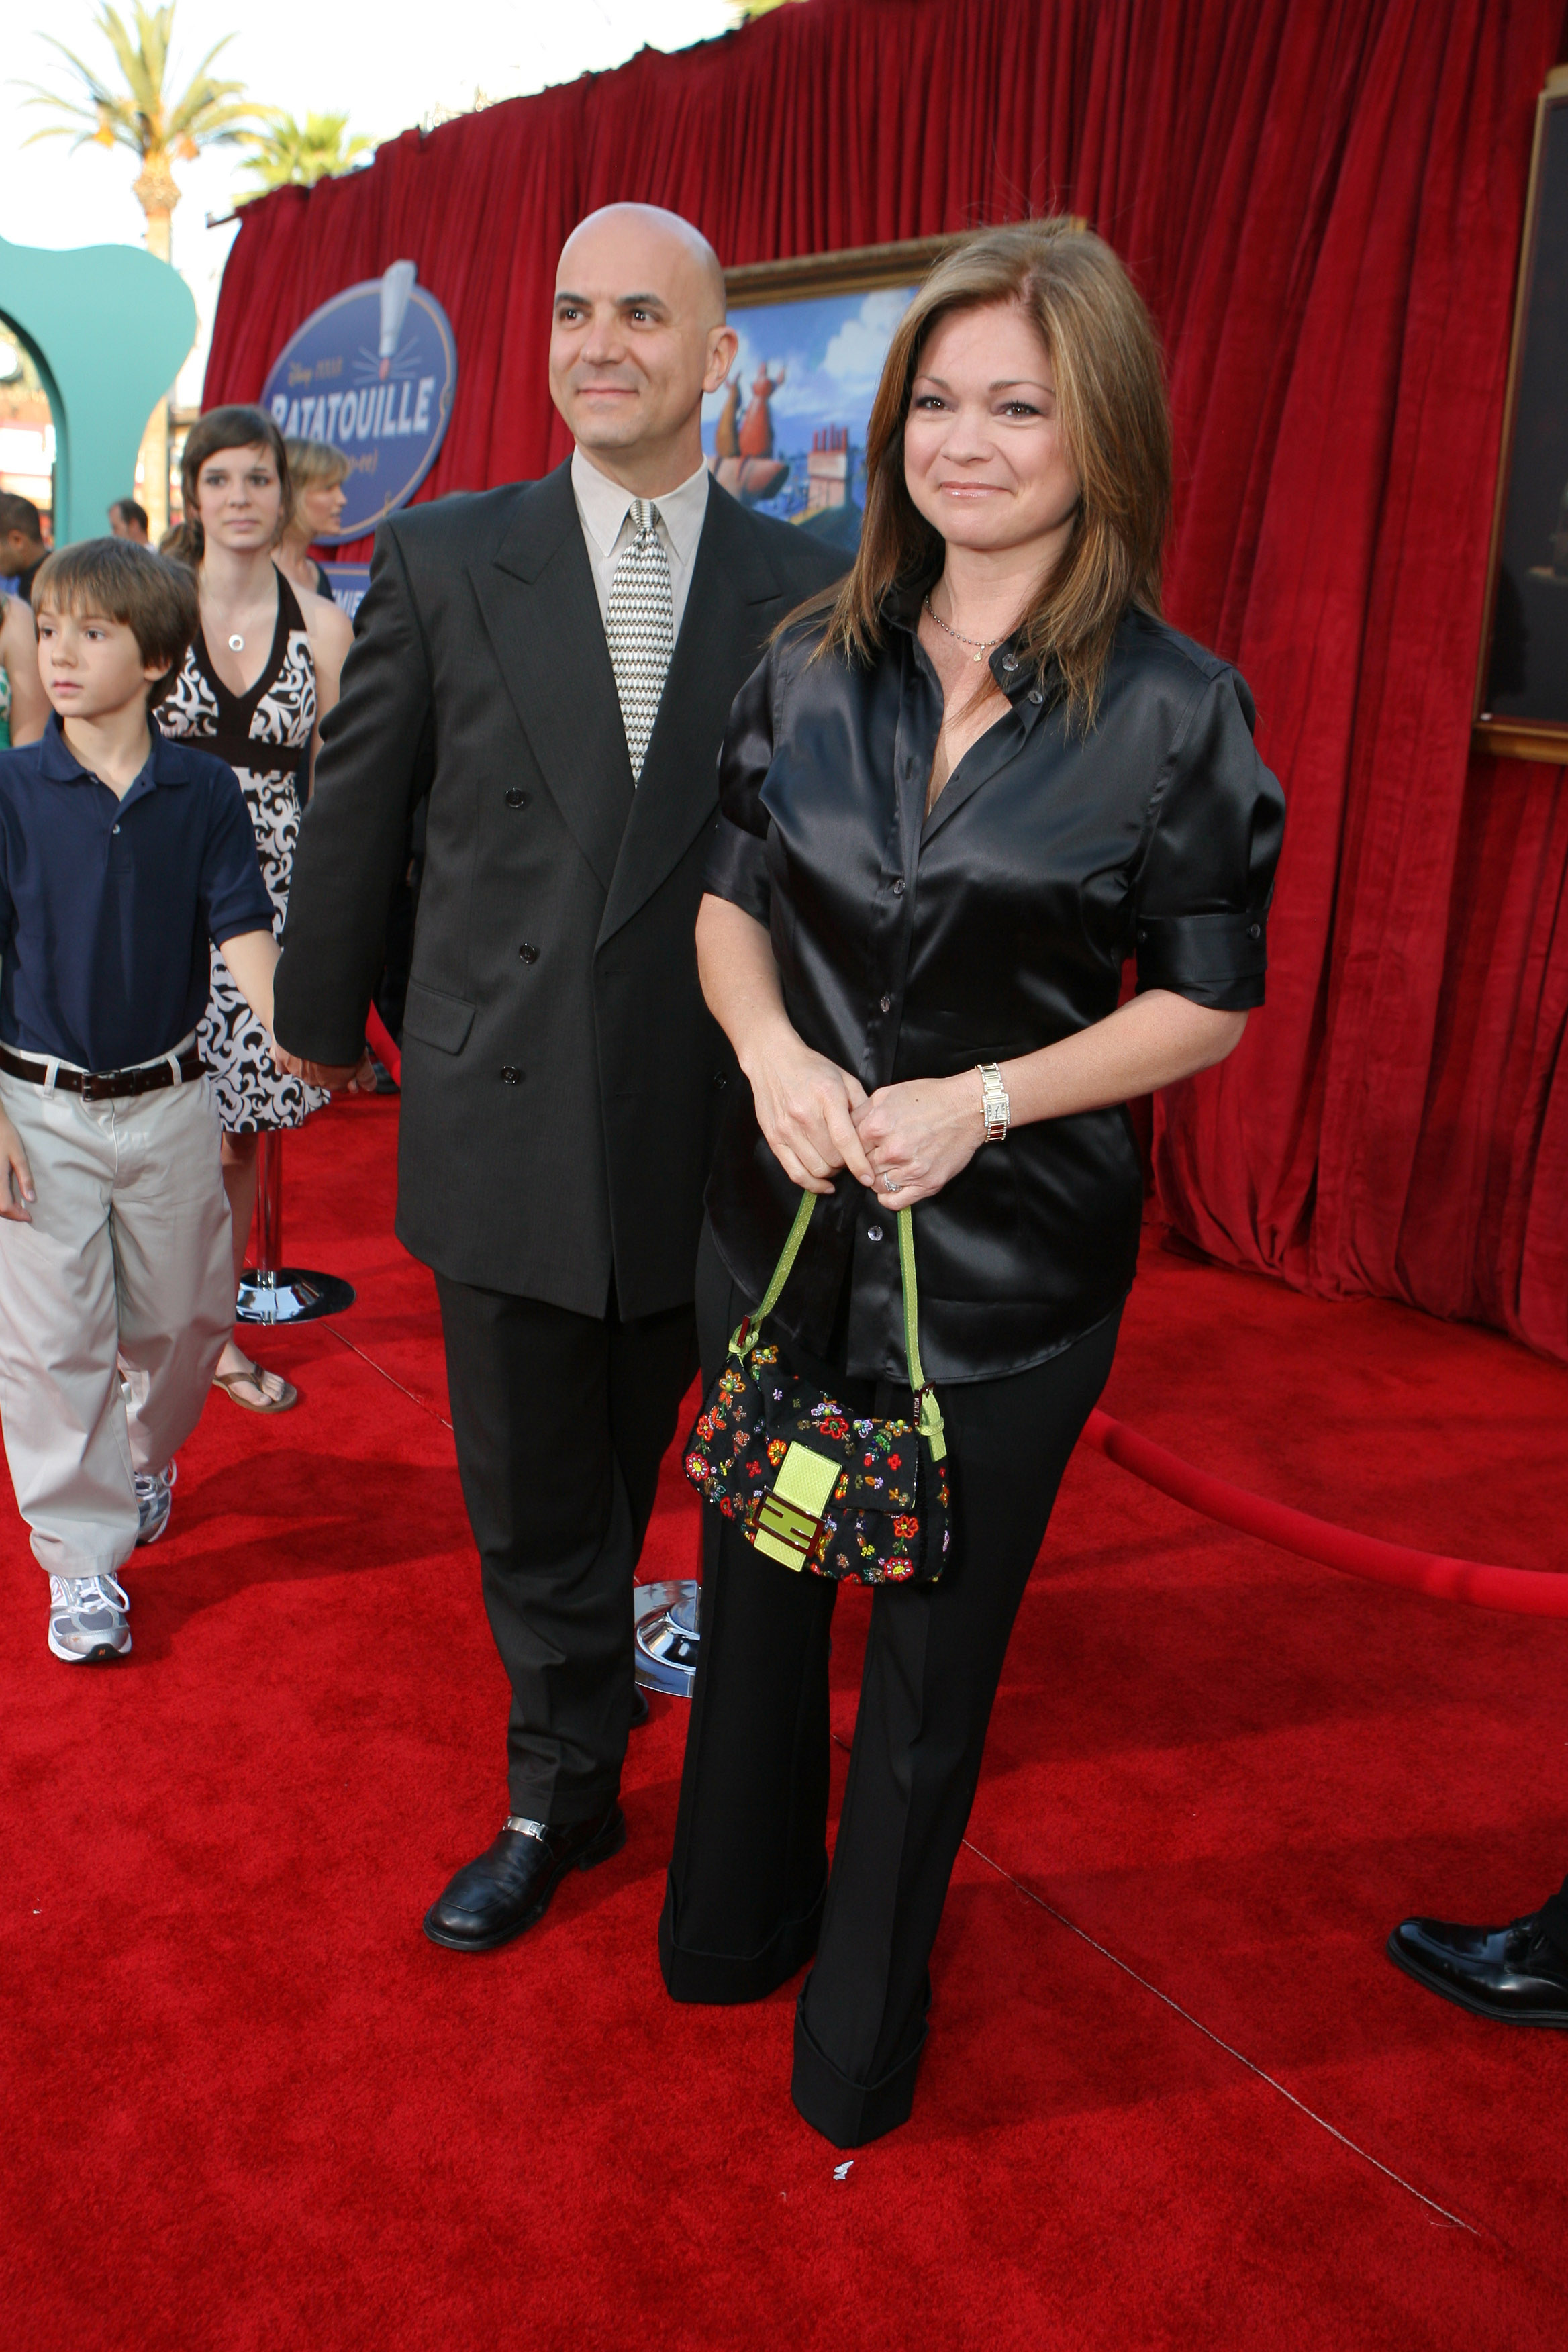 Valerie Bertinelli and Tom Vitale at he World Premiere of Disney/Pixar's "Ratatouille" at Kodak Theater in Hollywood, California | Source: Getty Images